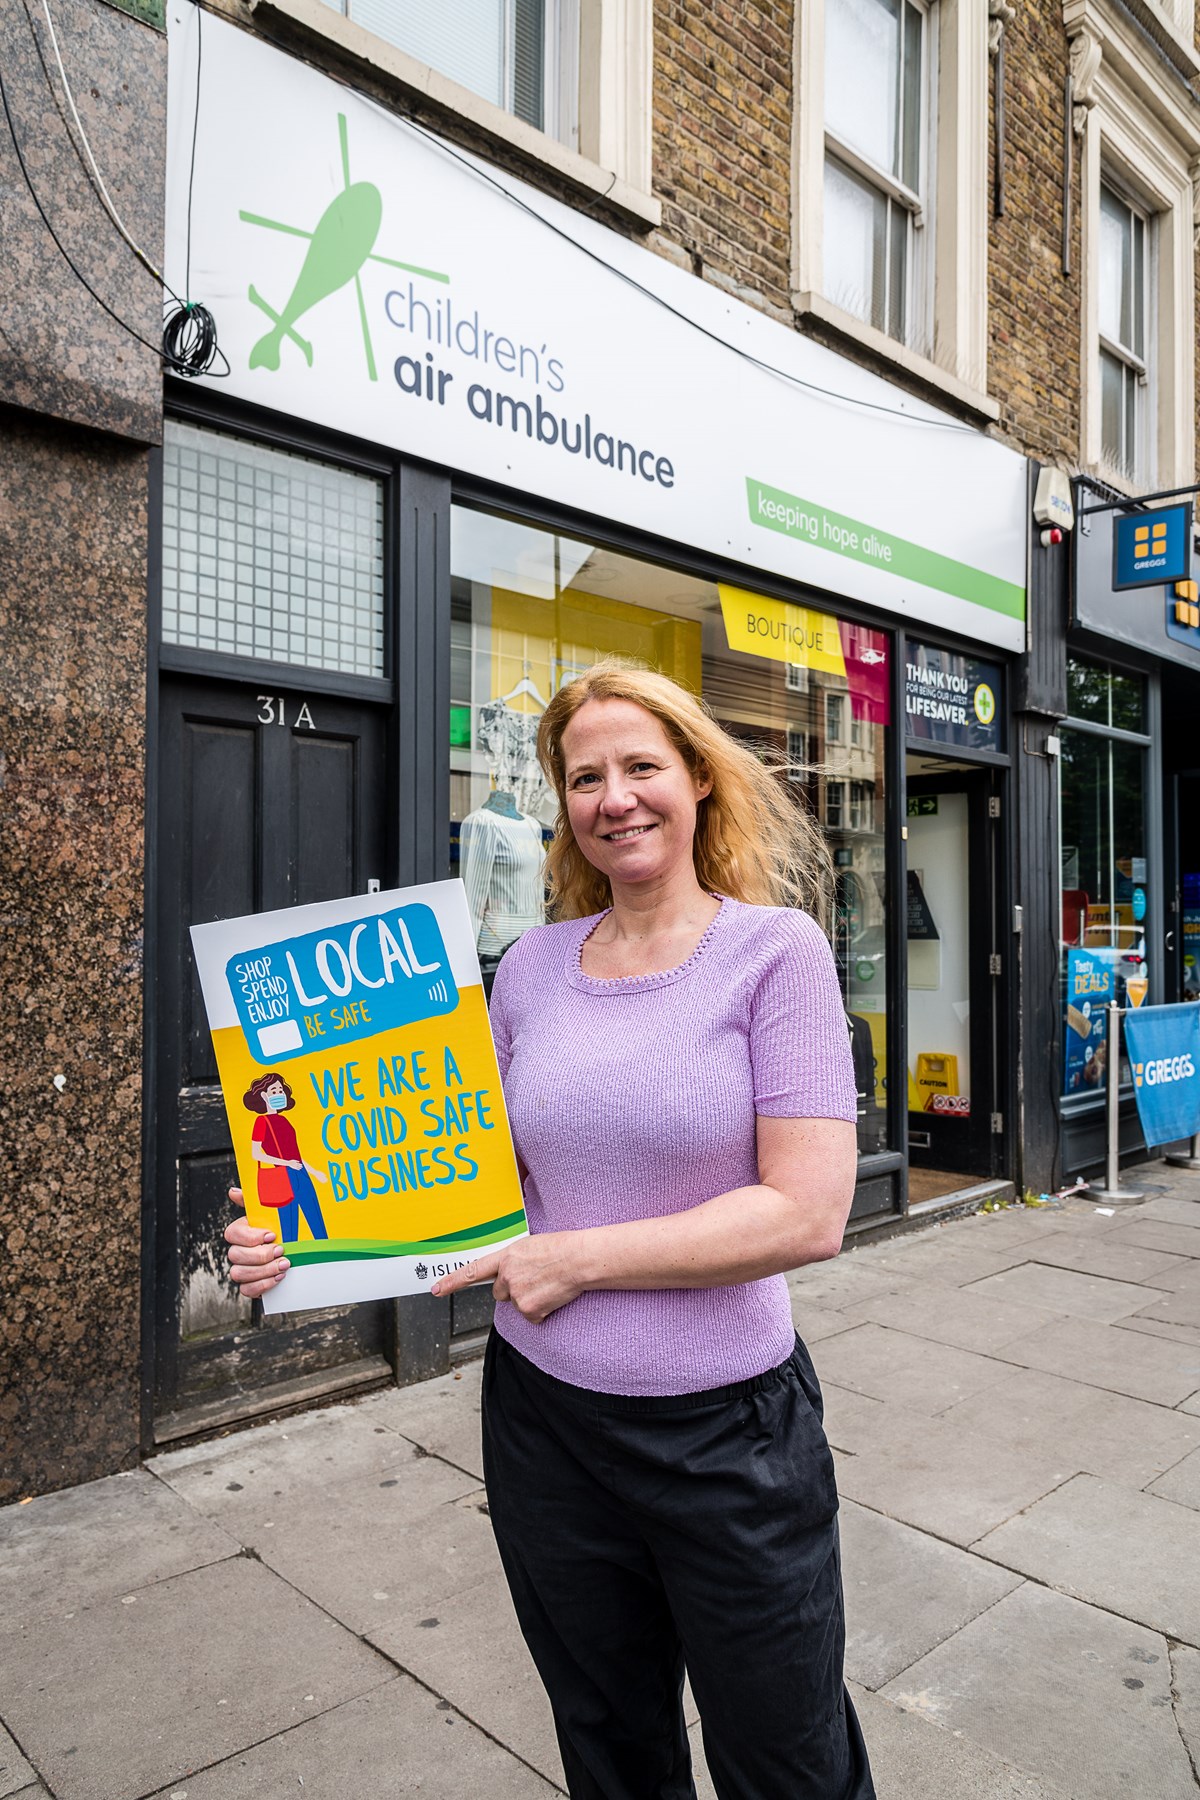 Joanna Phillips, manager of the Children's Air Ambulance charity shop in Junction Road, Archway, promoting the Covid-Safe Business Award scheme window stickers